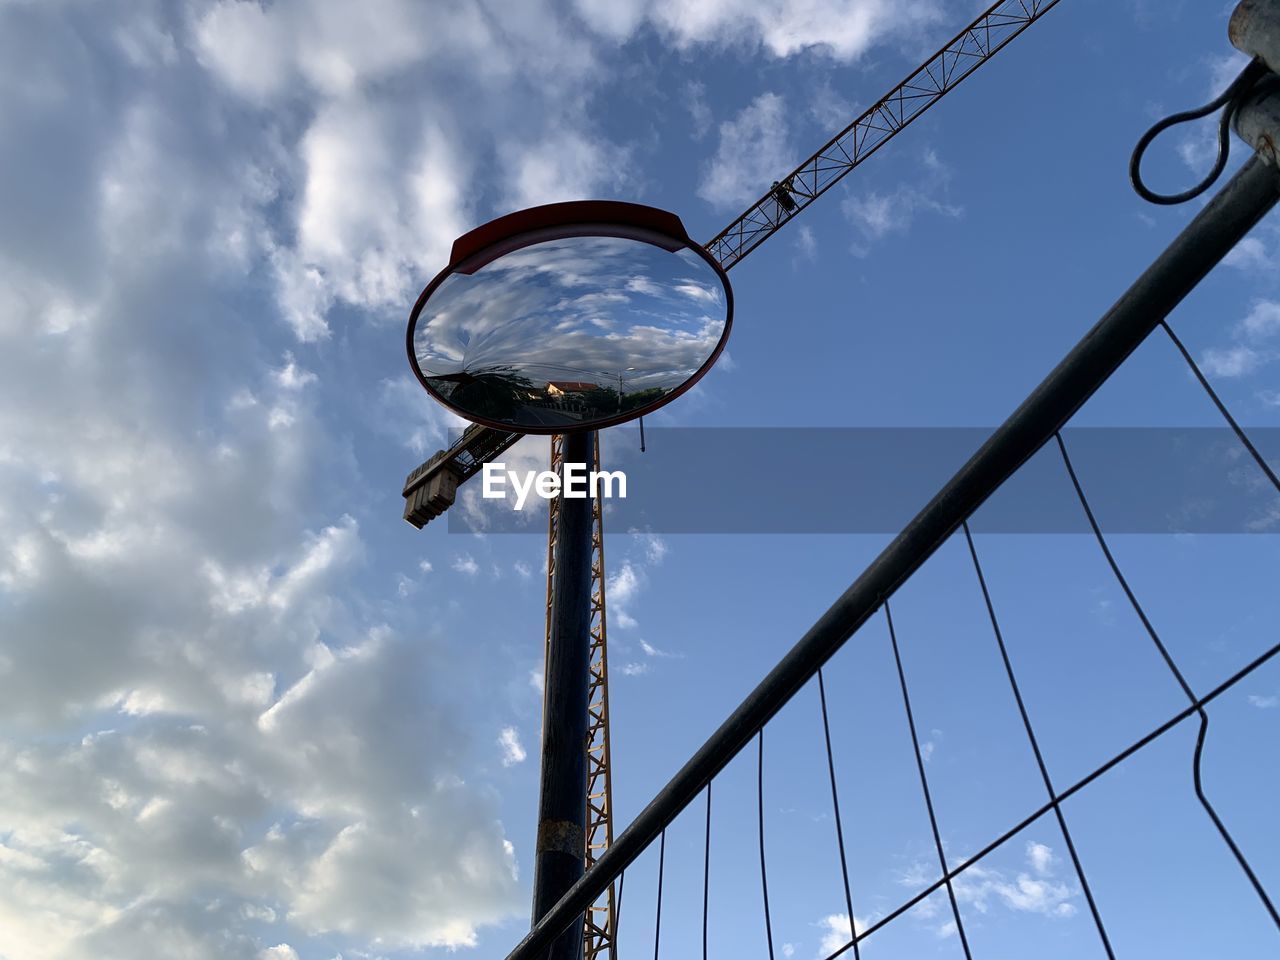 LOW ANGLE VIEW OF STREET LIGHT AGAINST BLUE SKY